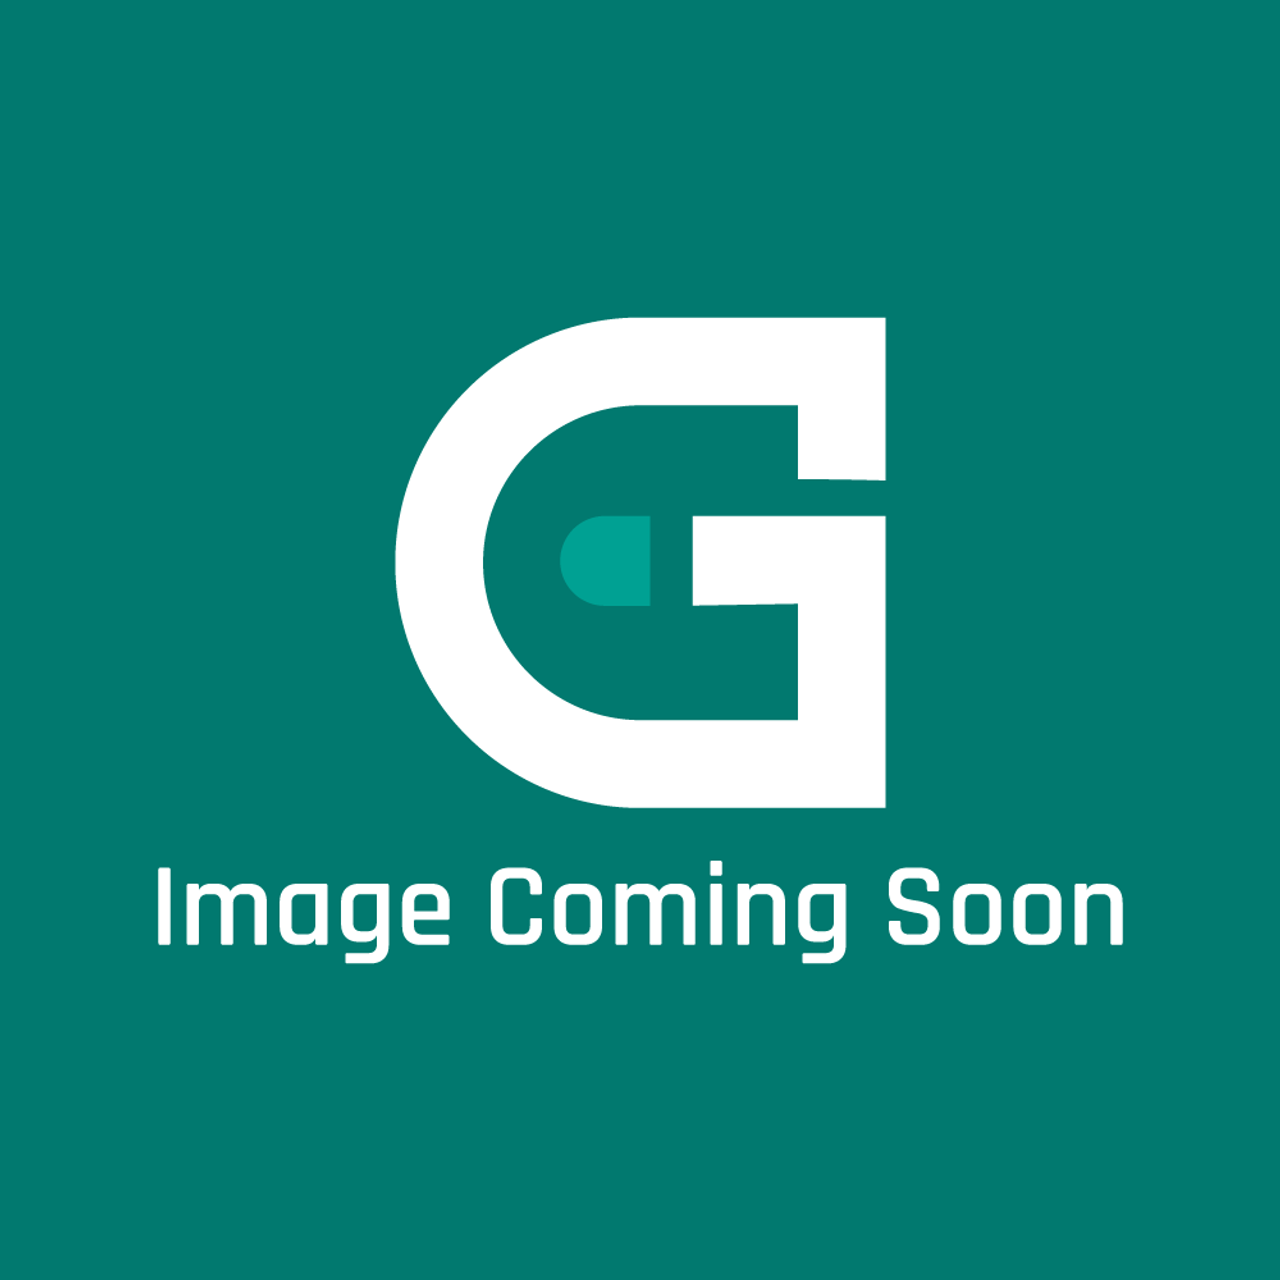 AGA Marvel RO2M320009 - Glass Panel Retain Plate Of22 - Image Coming Soon!